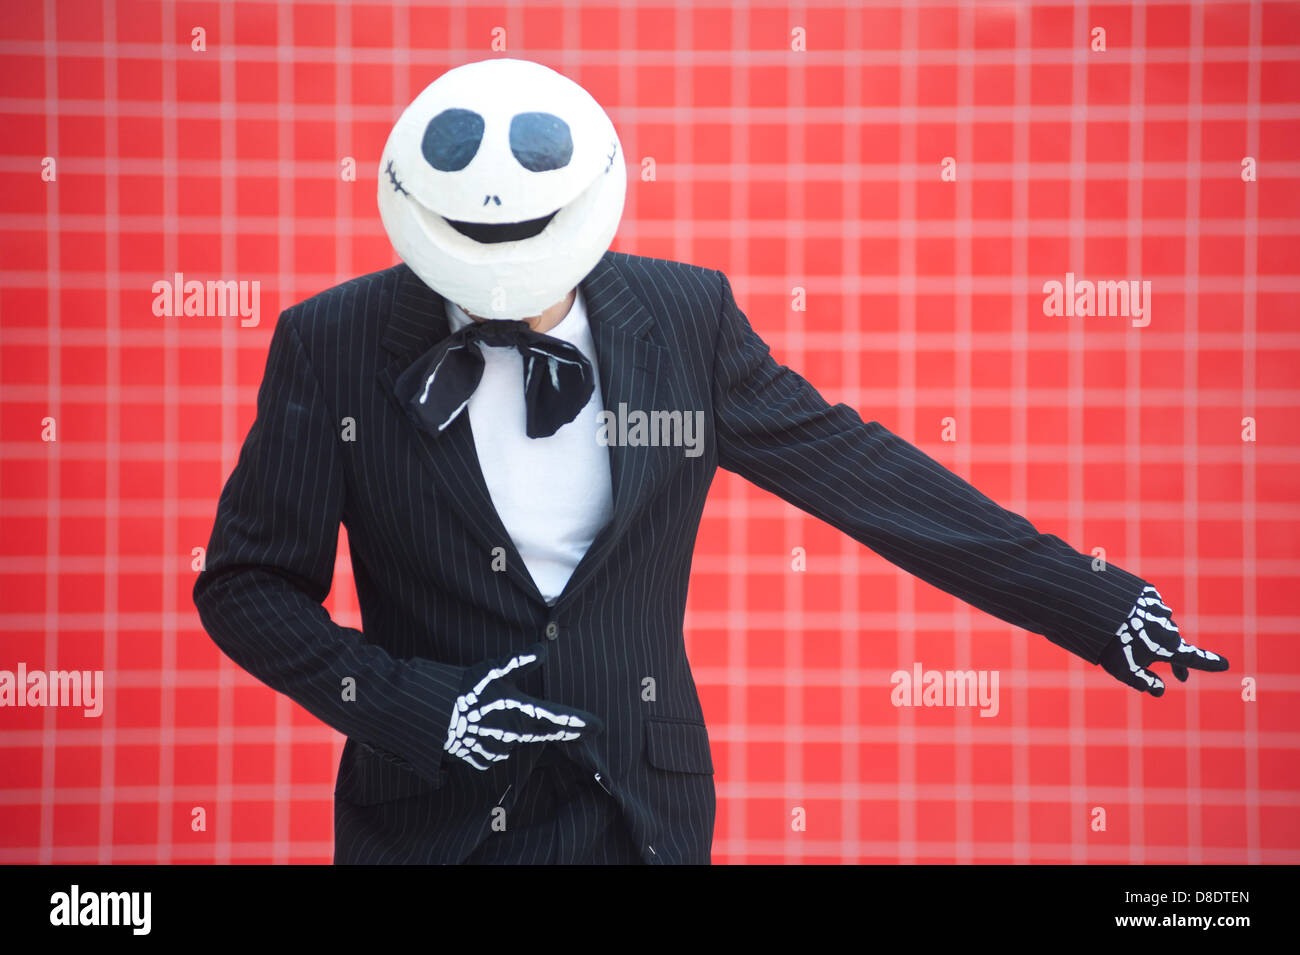 London, UK - 26 May 2013: Frazer Heritage dressed as Jack Skellington of The Nightmare Before Christmas poses for a picture during the London Comic Con 2013 at Excel London. London Comic Con is the UK's largest event dedicated to pop culture attracting thousands of artists, celebrities and fans of comic books, animes and movie memorabilia. Credit: Piero Cruciatti/Alamy Live News Stock Photo